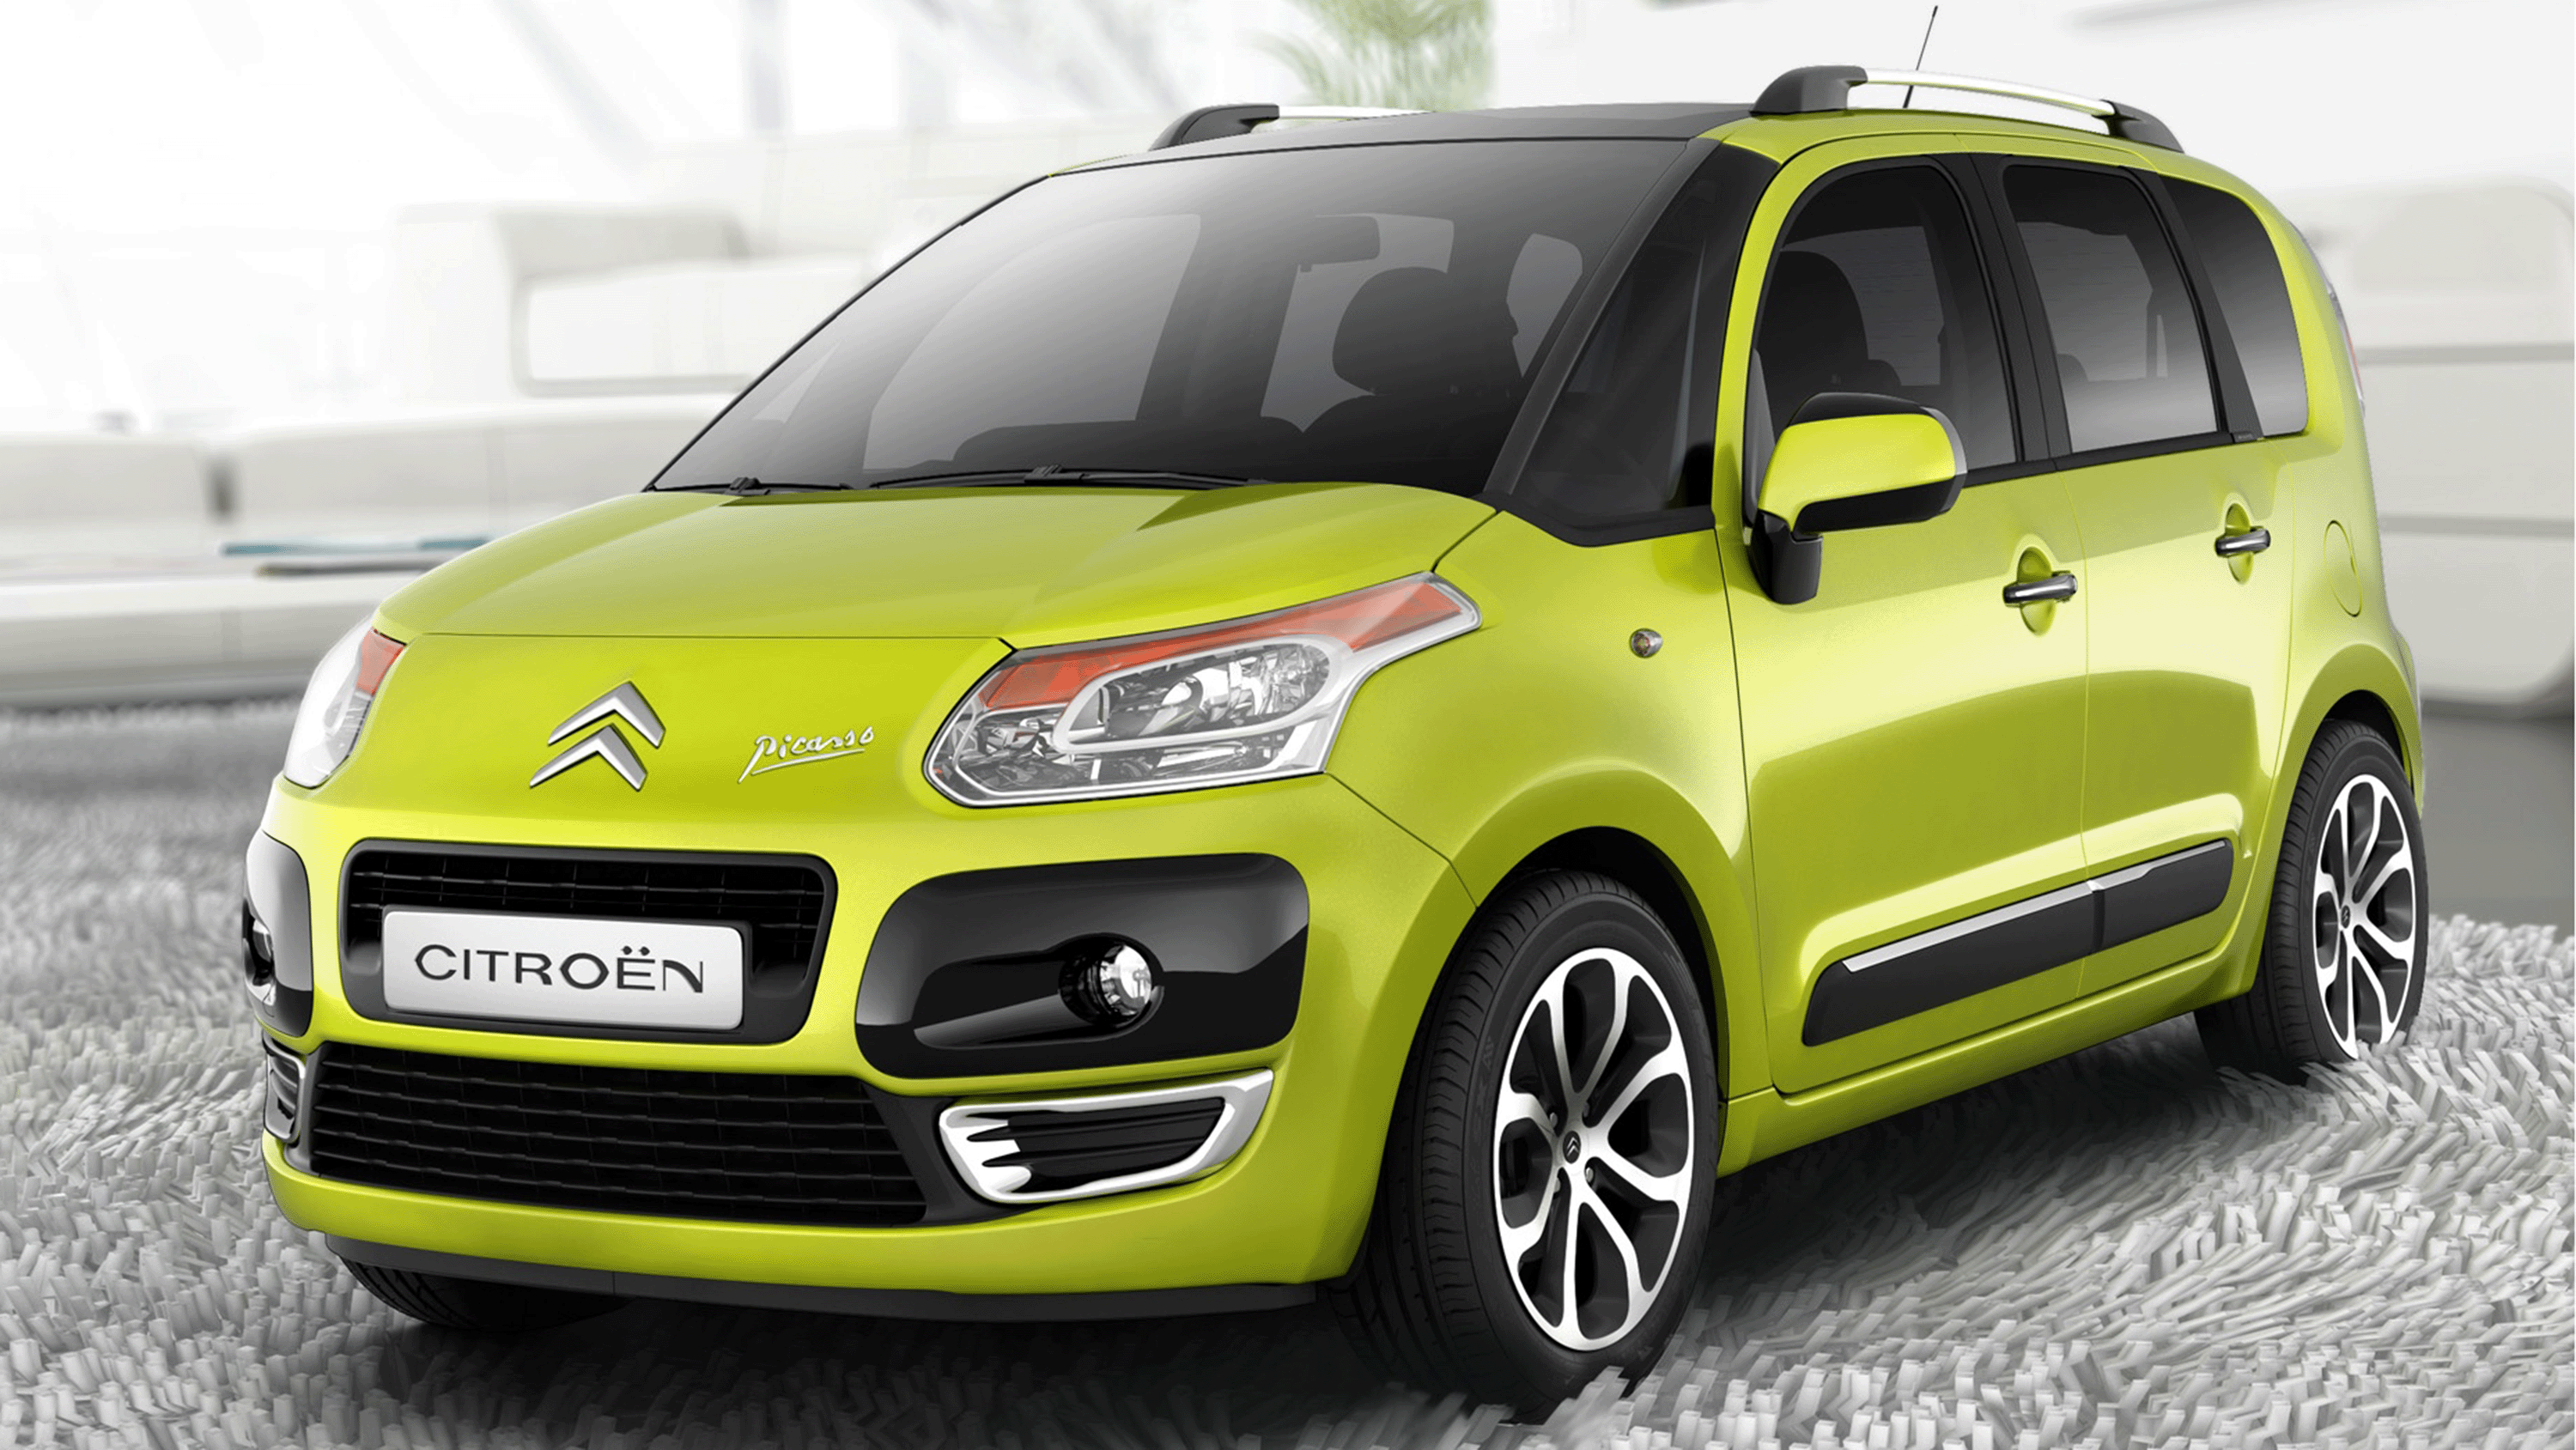 All About the Citroen C3 Picasso's Interior, Panoramic Windscreen